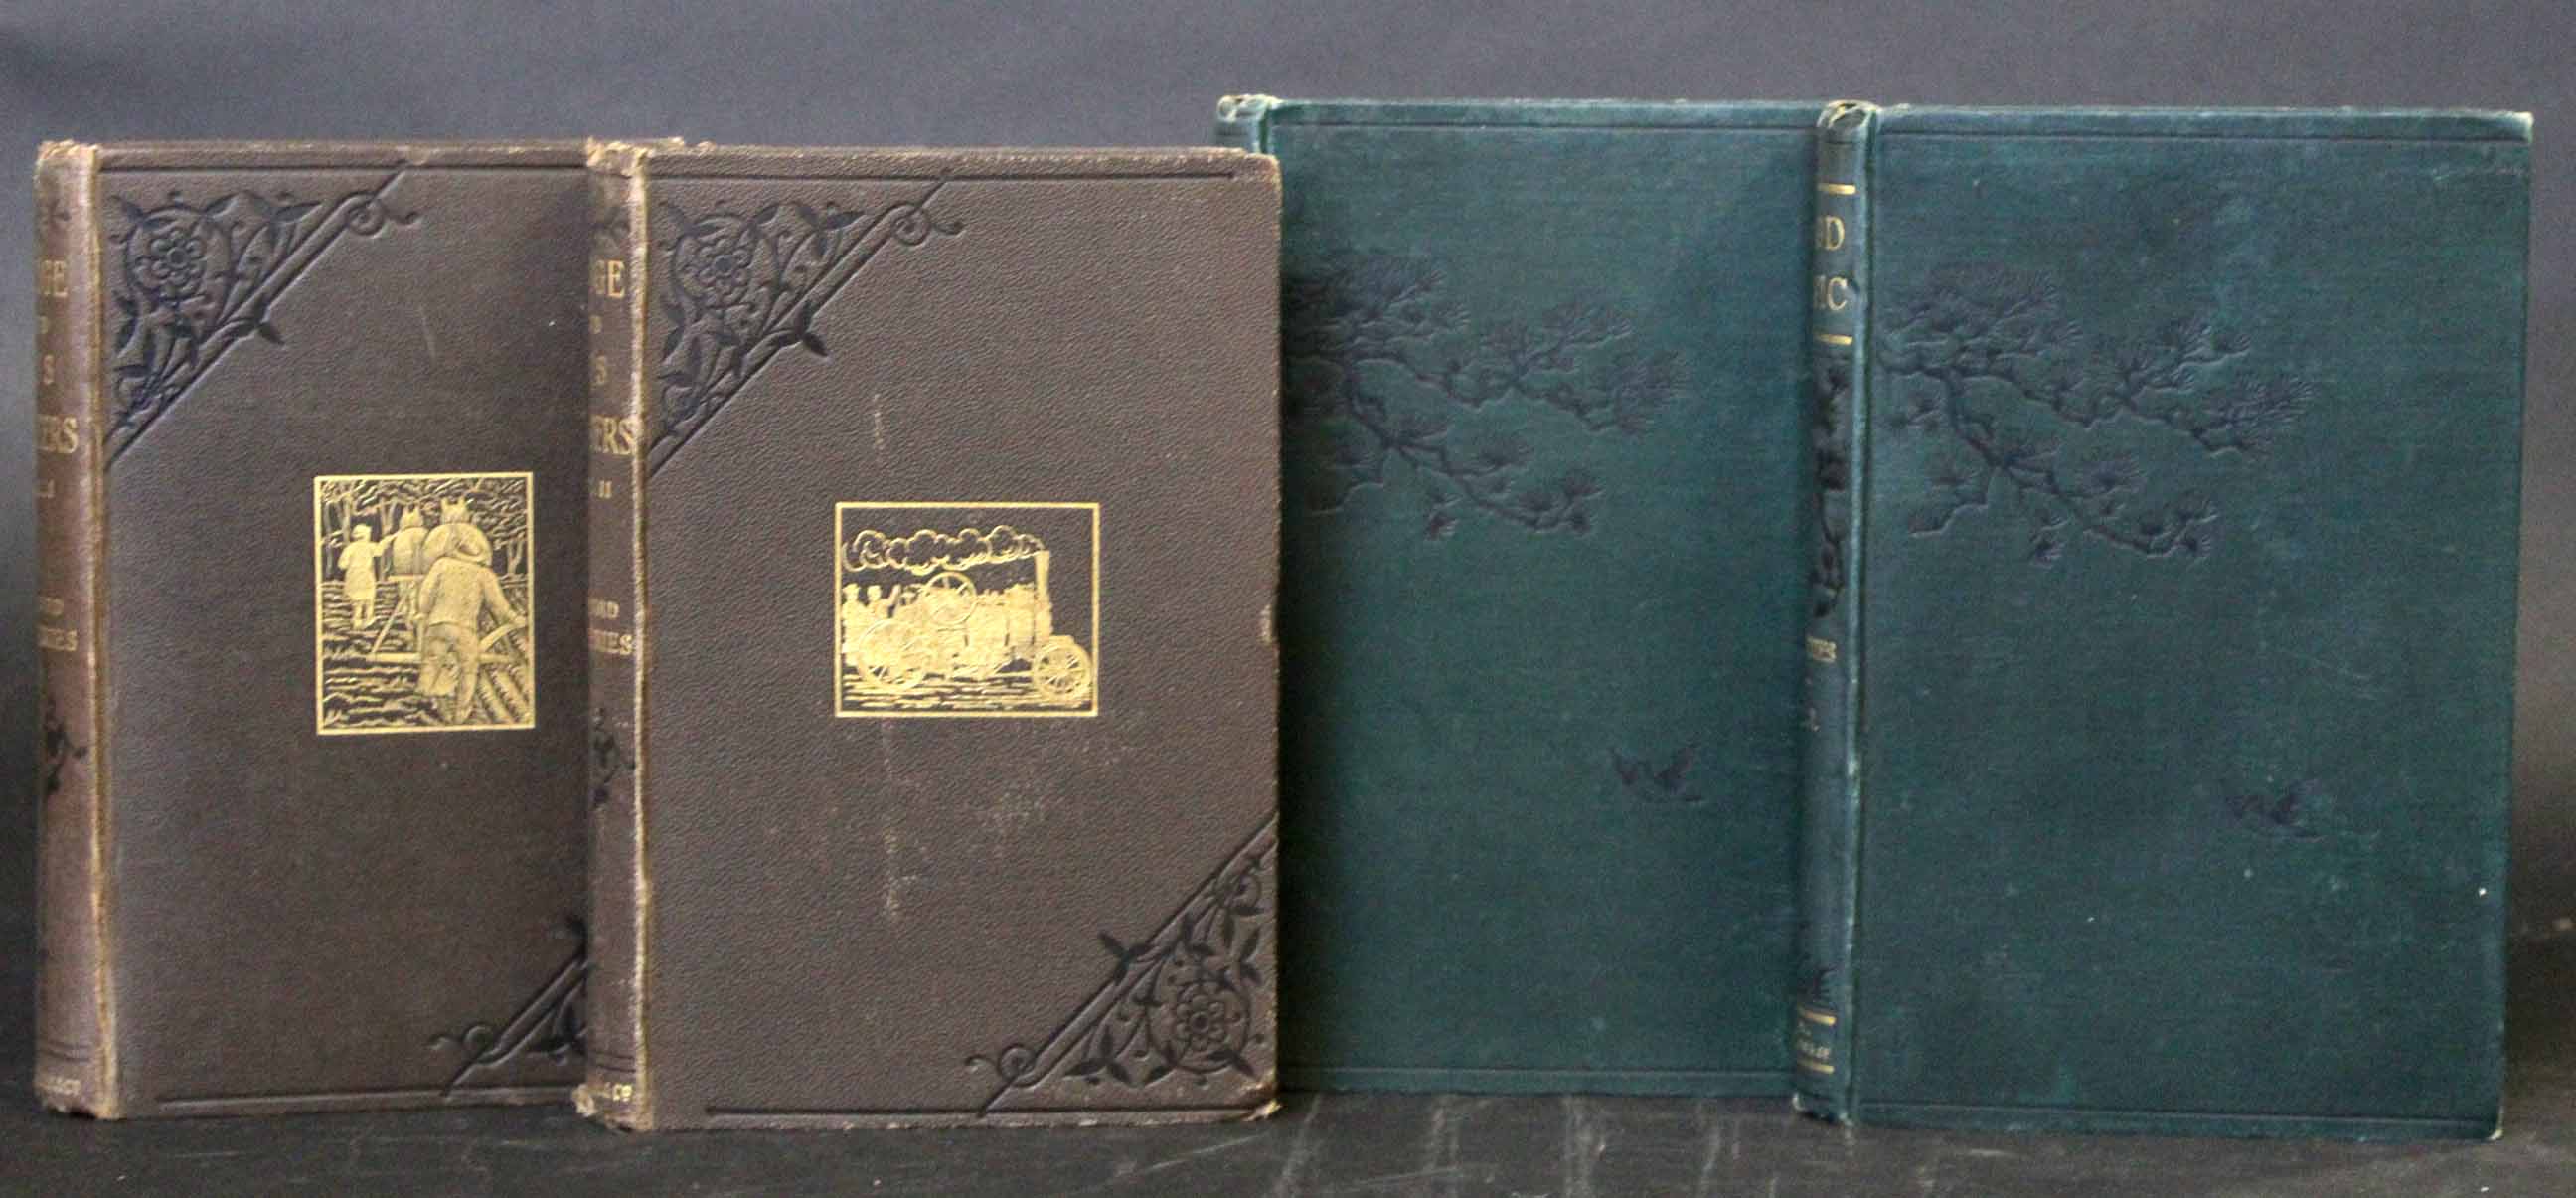 RICHARD JEFFERIES: 2 titles: HODGE AND HIS MASTERS, London, Smith Elder & Co, 1880, 1st edition, 2 - Image 2 of 2